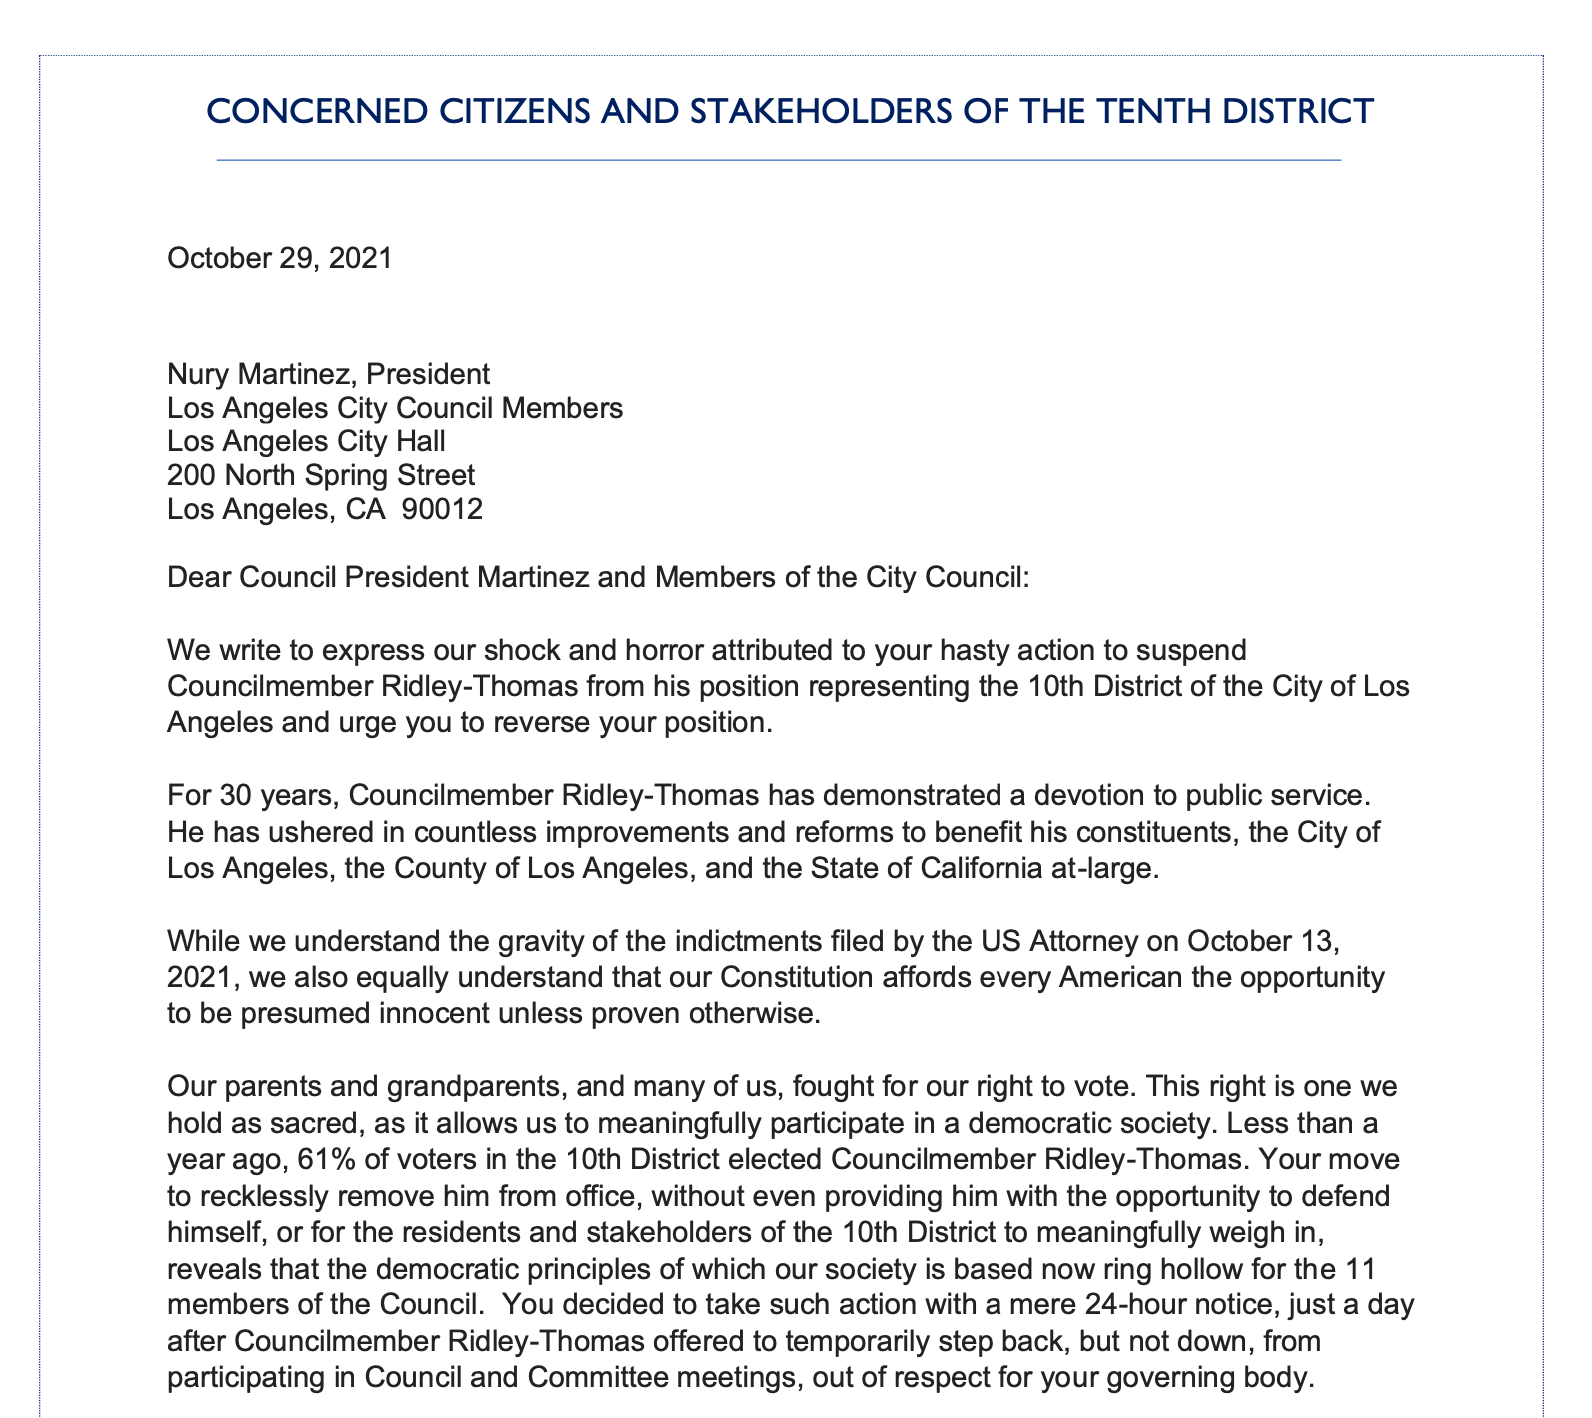 Letter from “Concerned Citizens and Stakeholders of the Tenth District” to Council President and Members of the Council